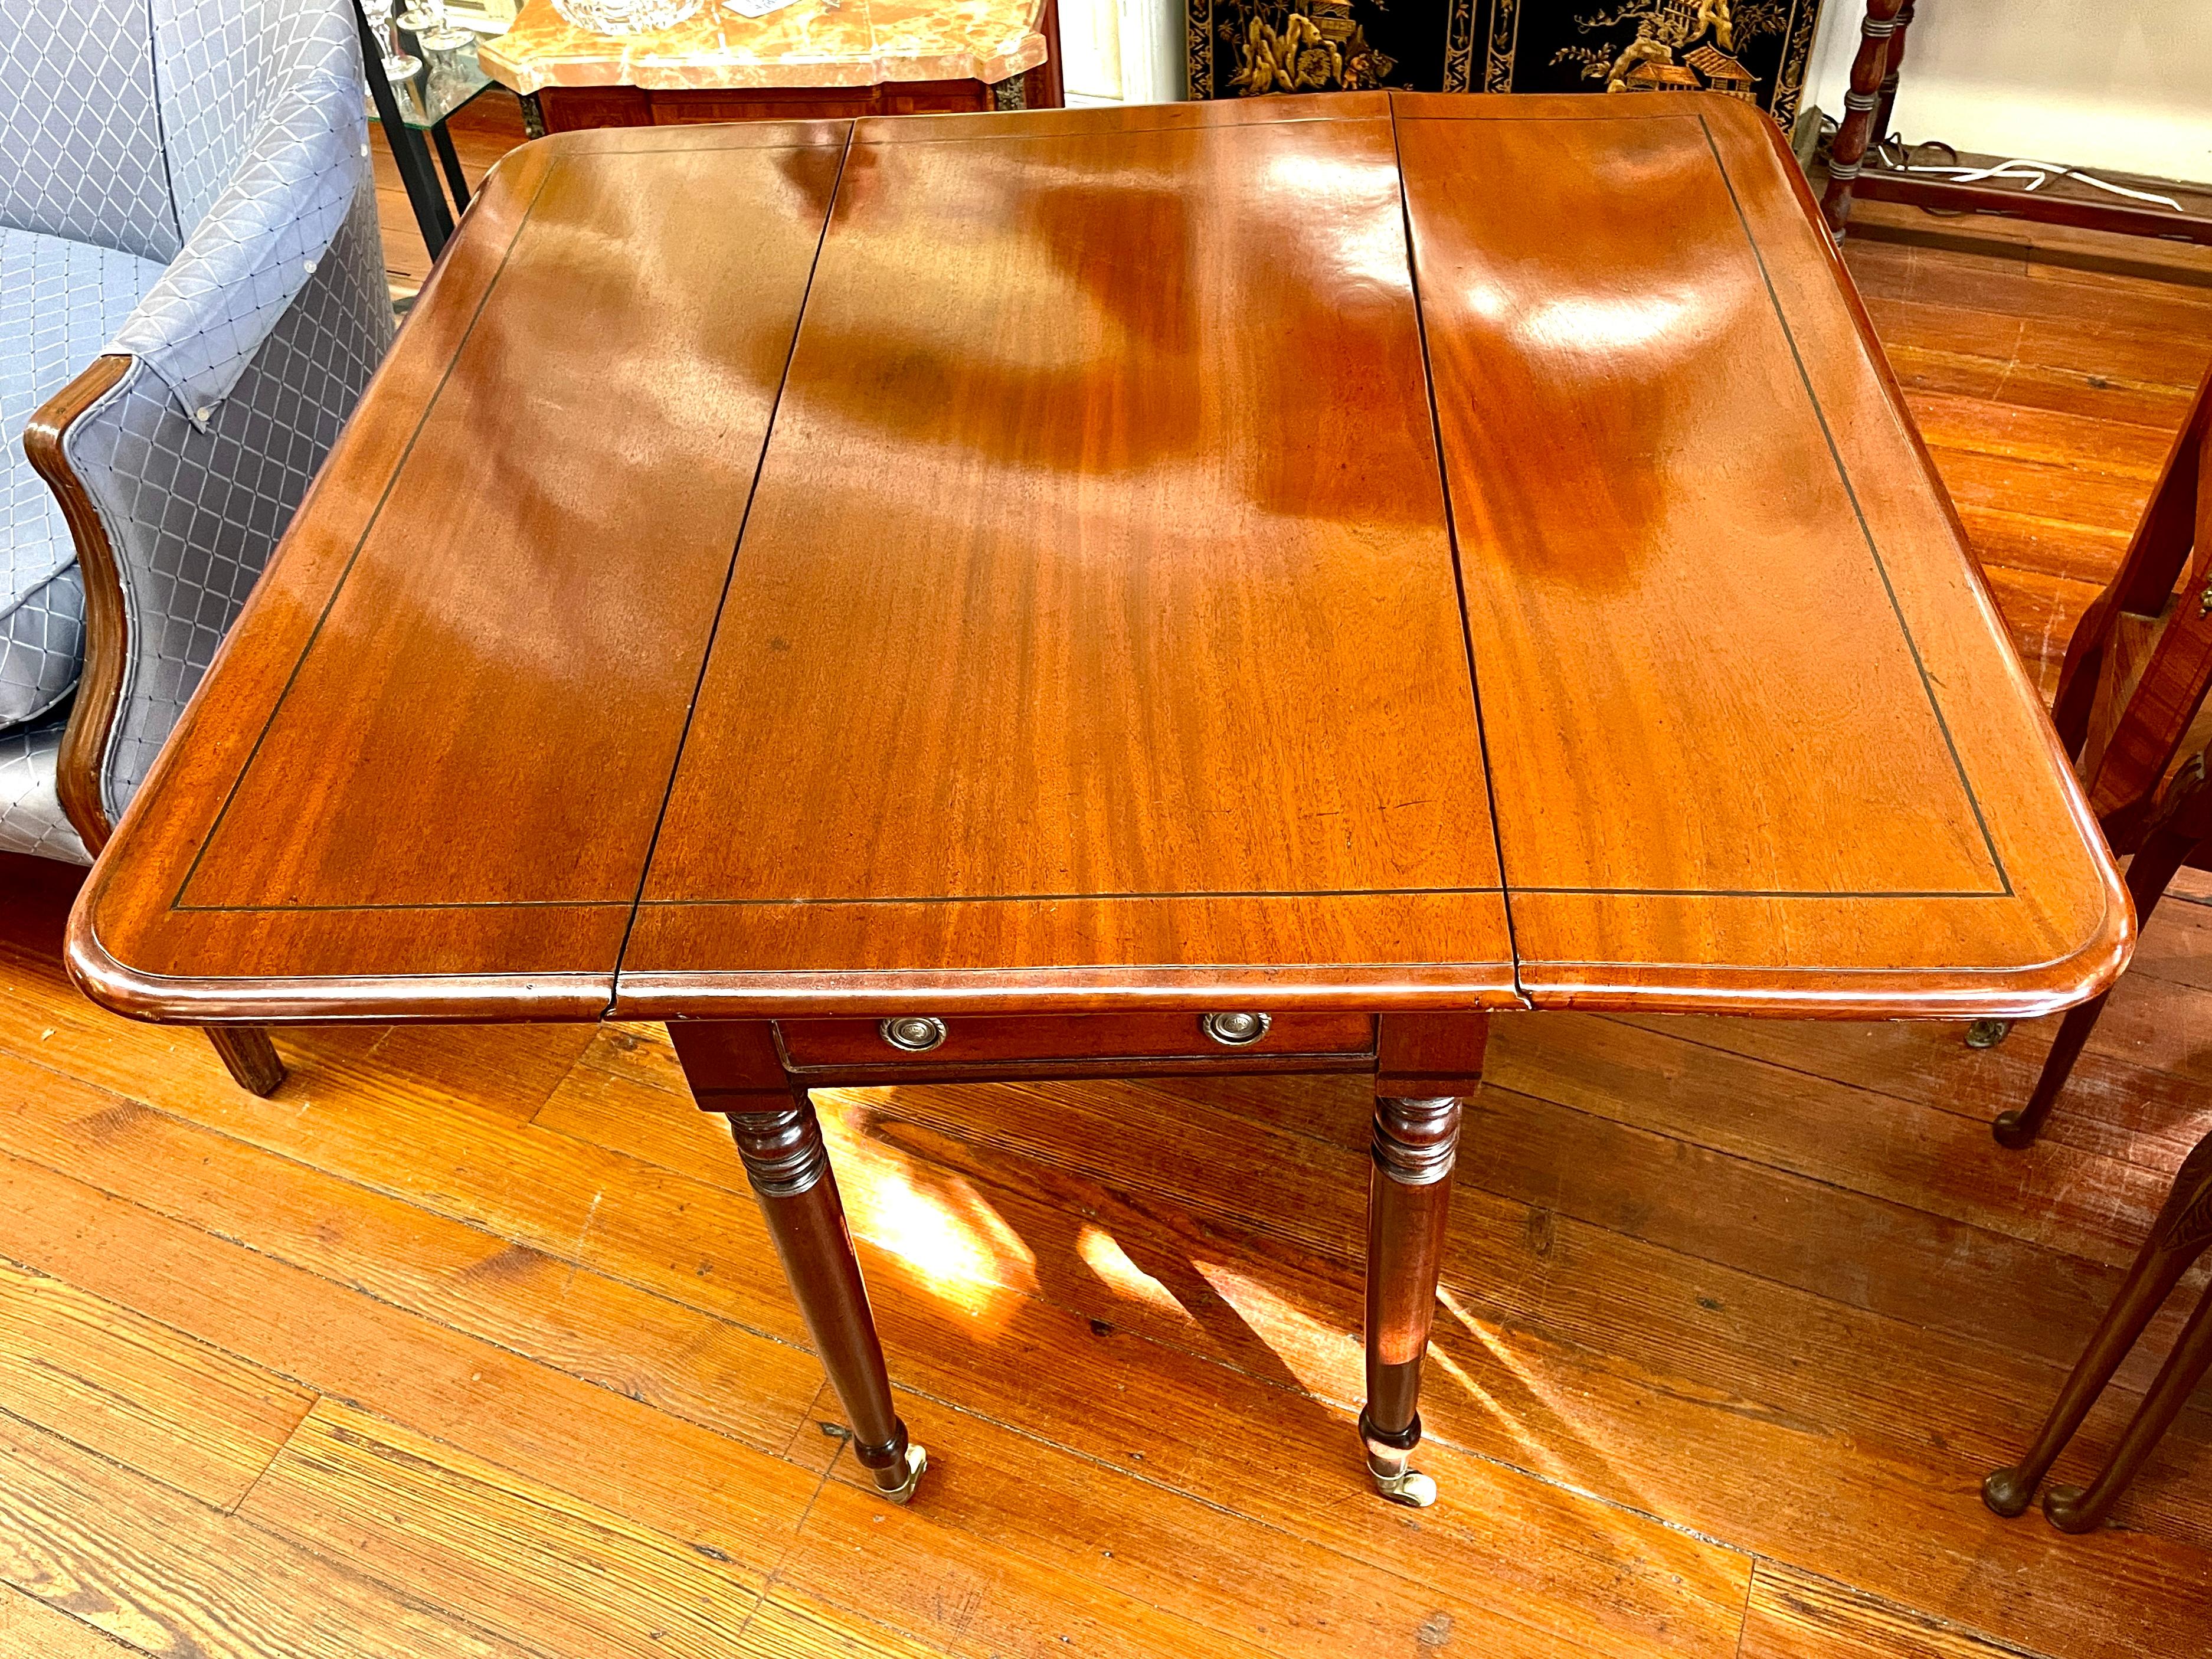 Fine and useful antique English George IV black line inlaid figured mahogany Sheraton style drop-leaf Pembroke table. 
Opens to serve as a lovely small dining table for four. Retains its original casters and finish is extraordinary and in pristine